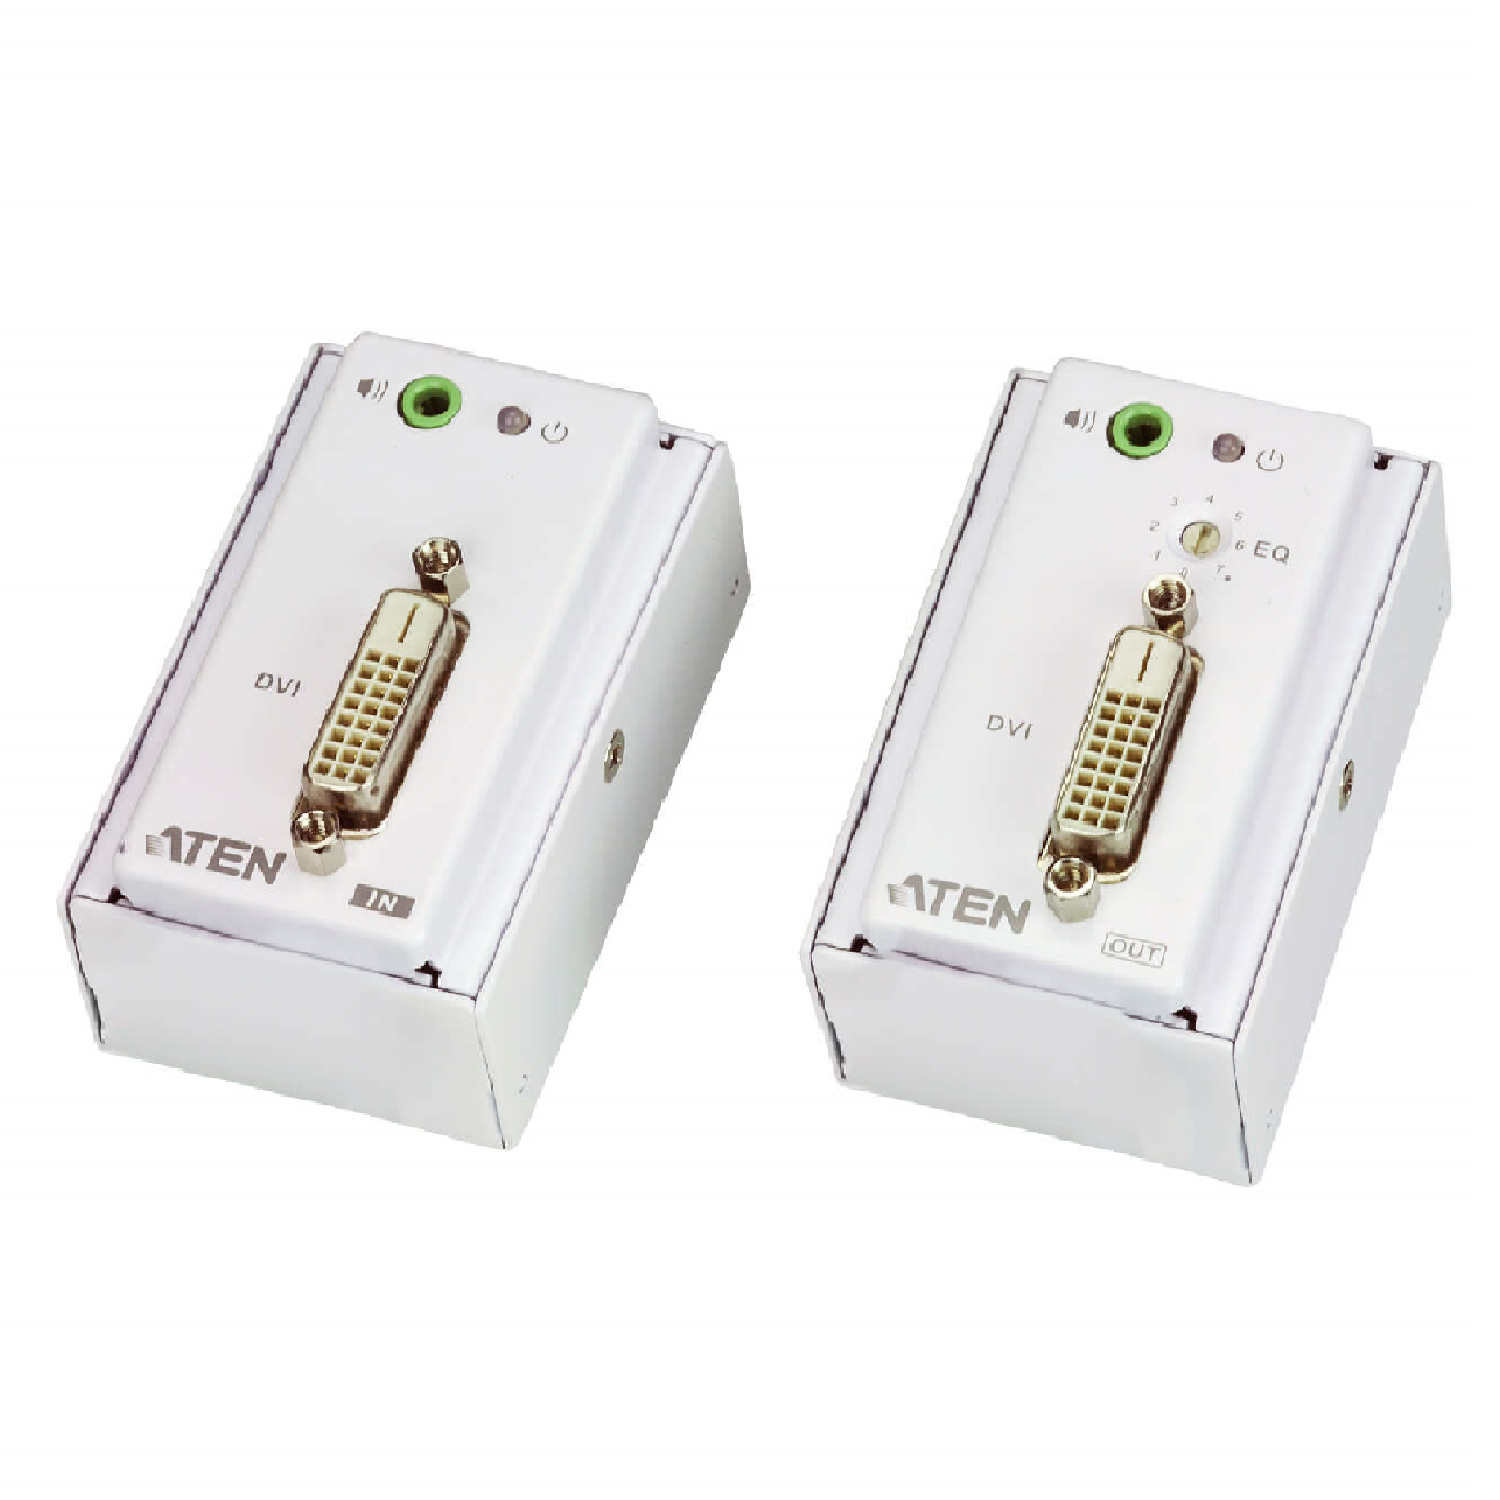 VE607 , DVI/Audio Cat 5 Extender with MK Wall Plate (1920 x 1200 @ 40m) , ATEN